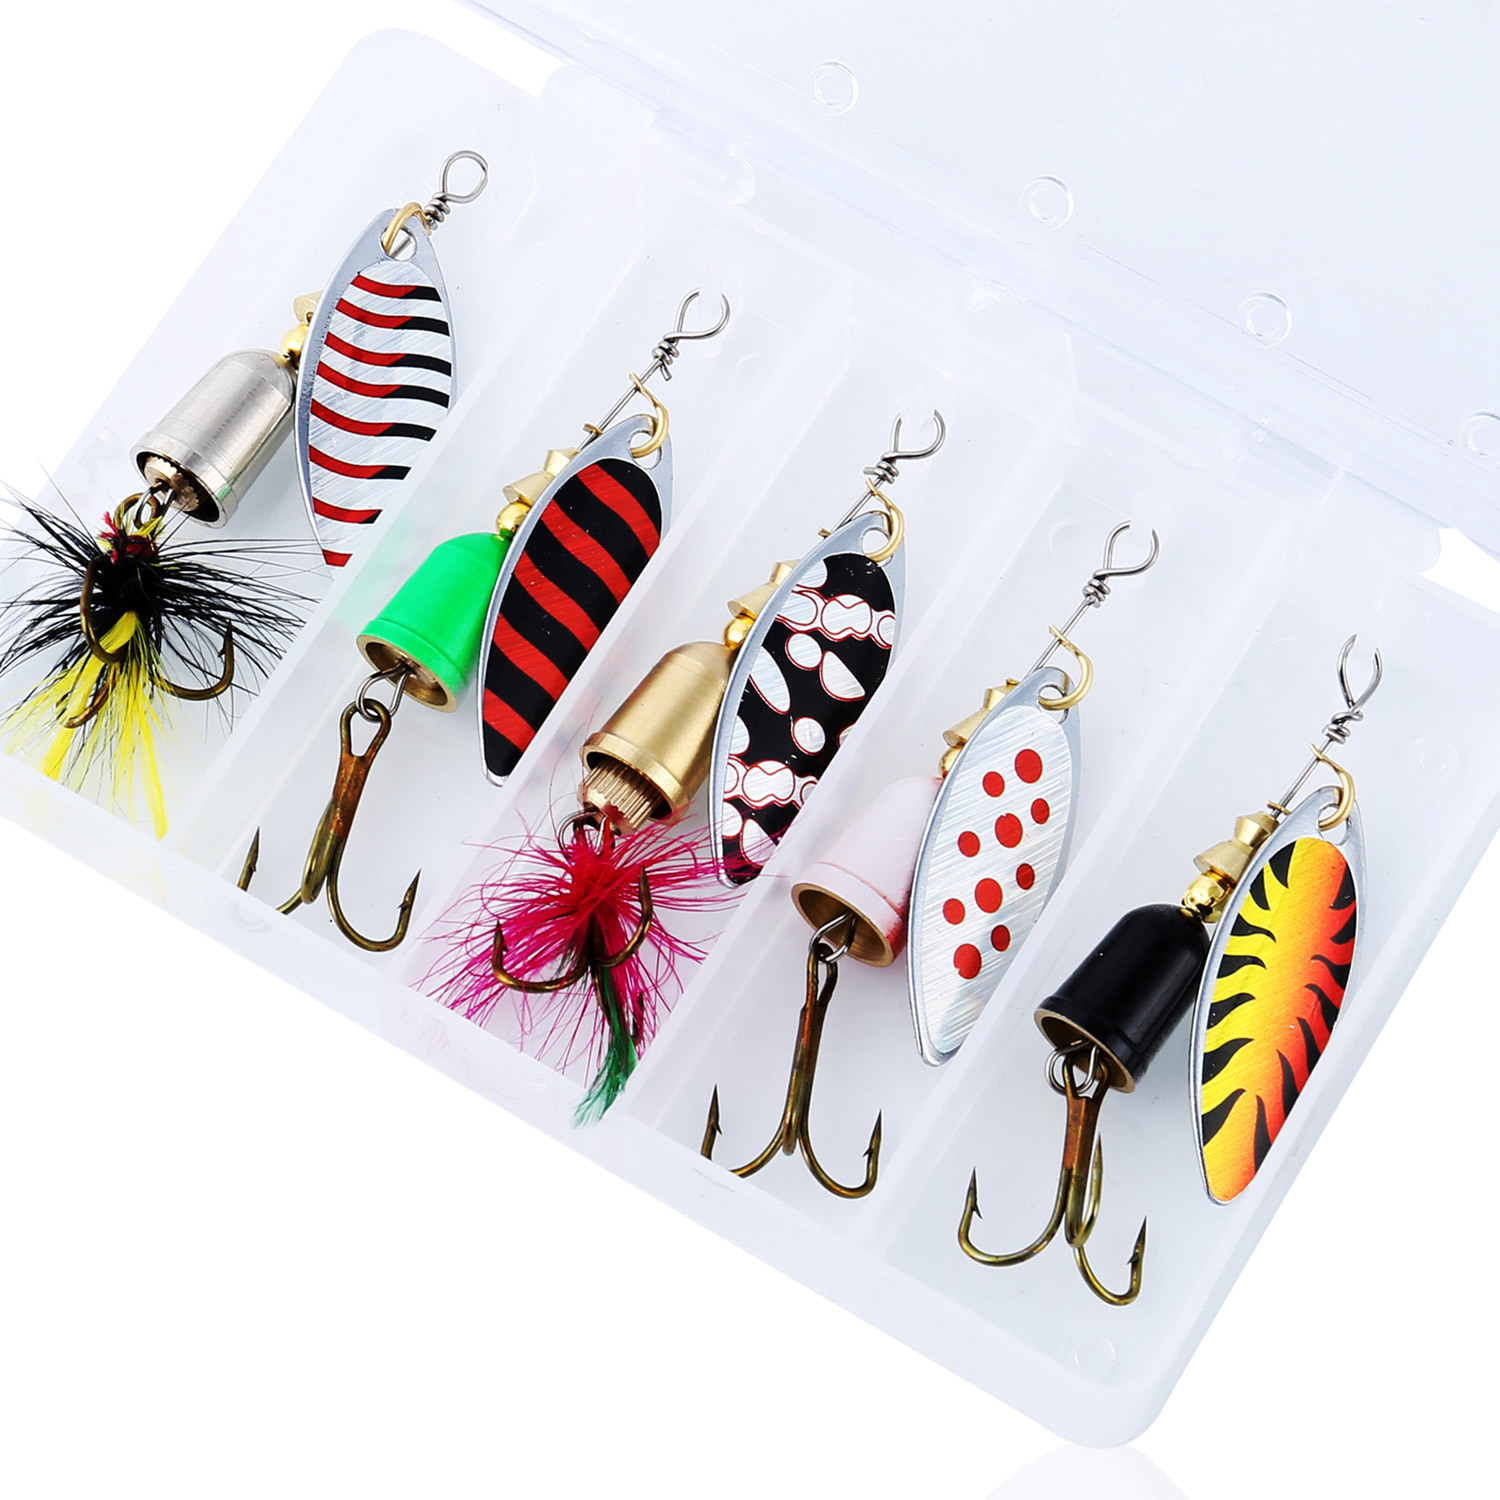 Sougayilang Fishing Lure Spinnerbaits 5Pcs Spinner Baits Kit for Trout Bass  Salmon-Type 3